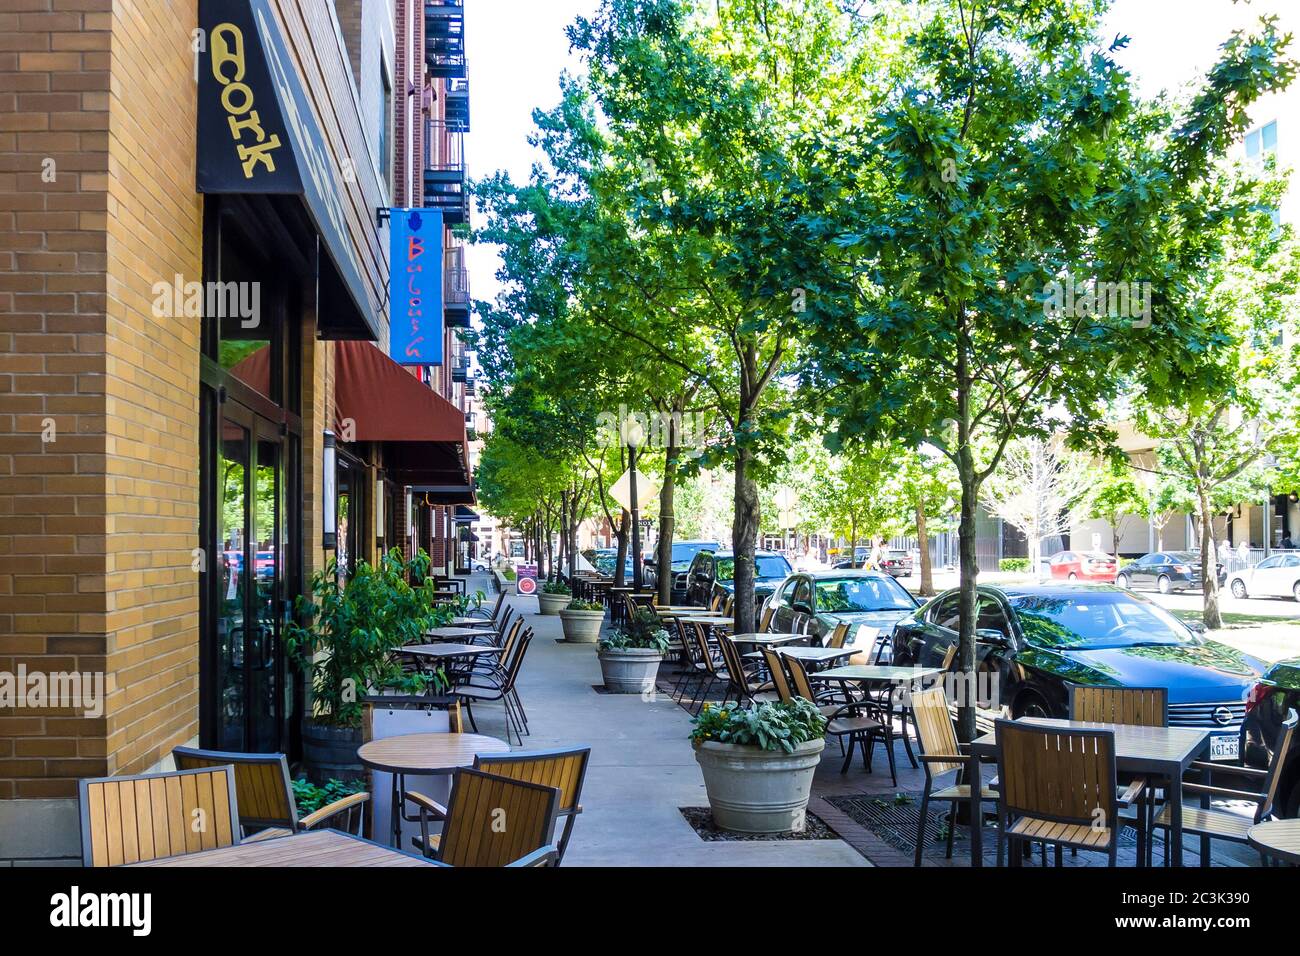 Sidewalk Dining on Cityplace West Blvd of Uptown Dallas Stock Photo